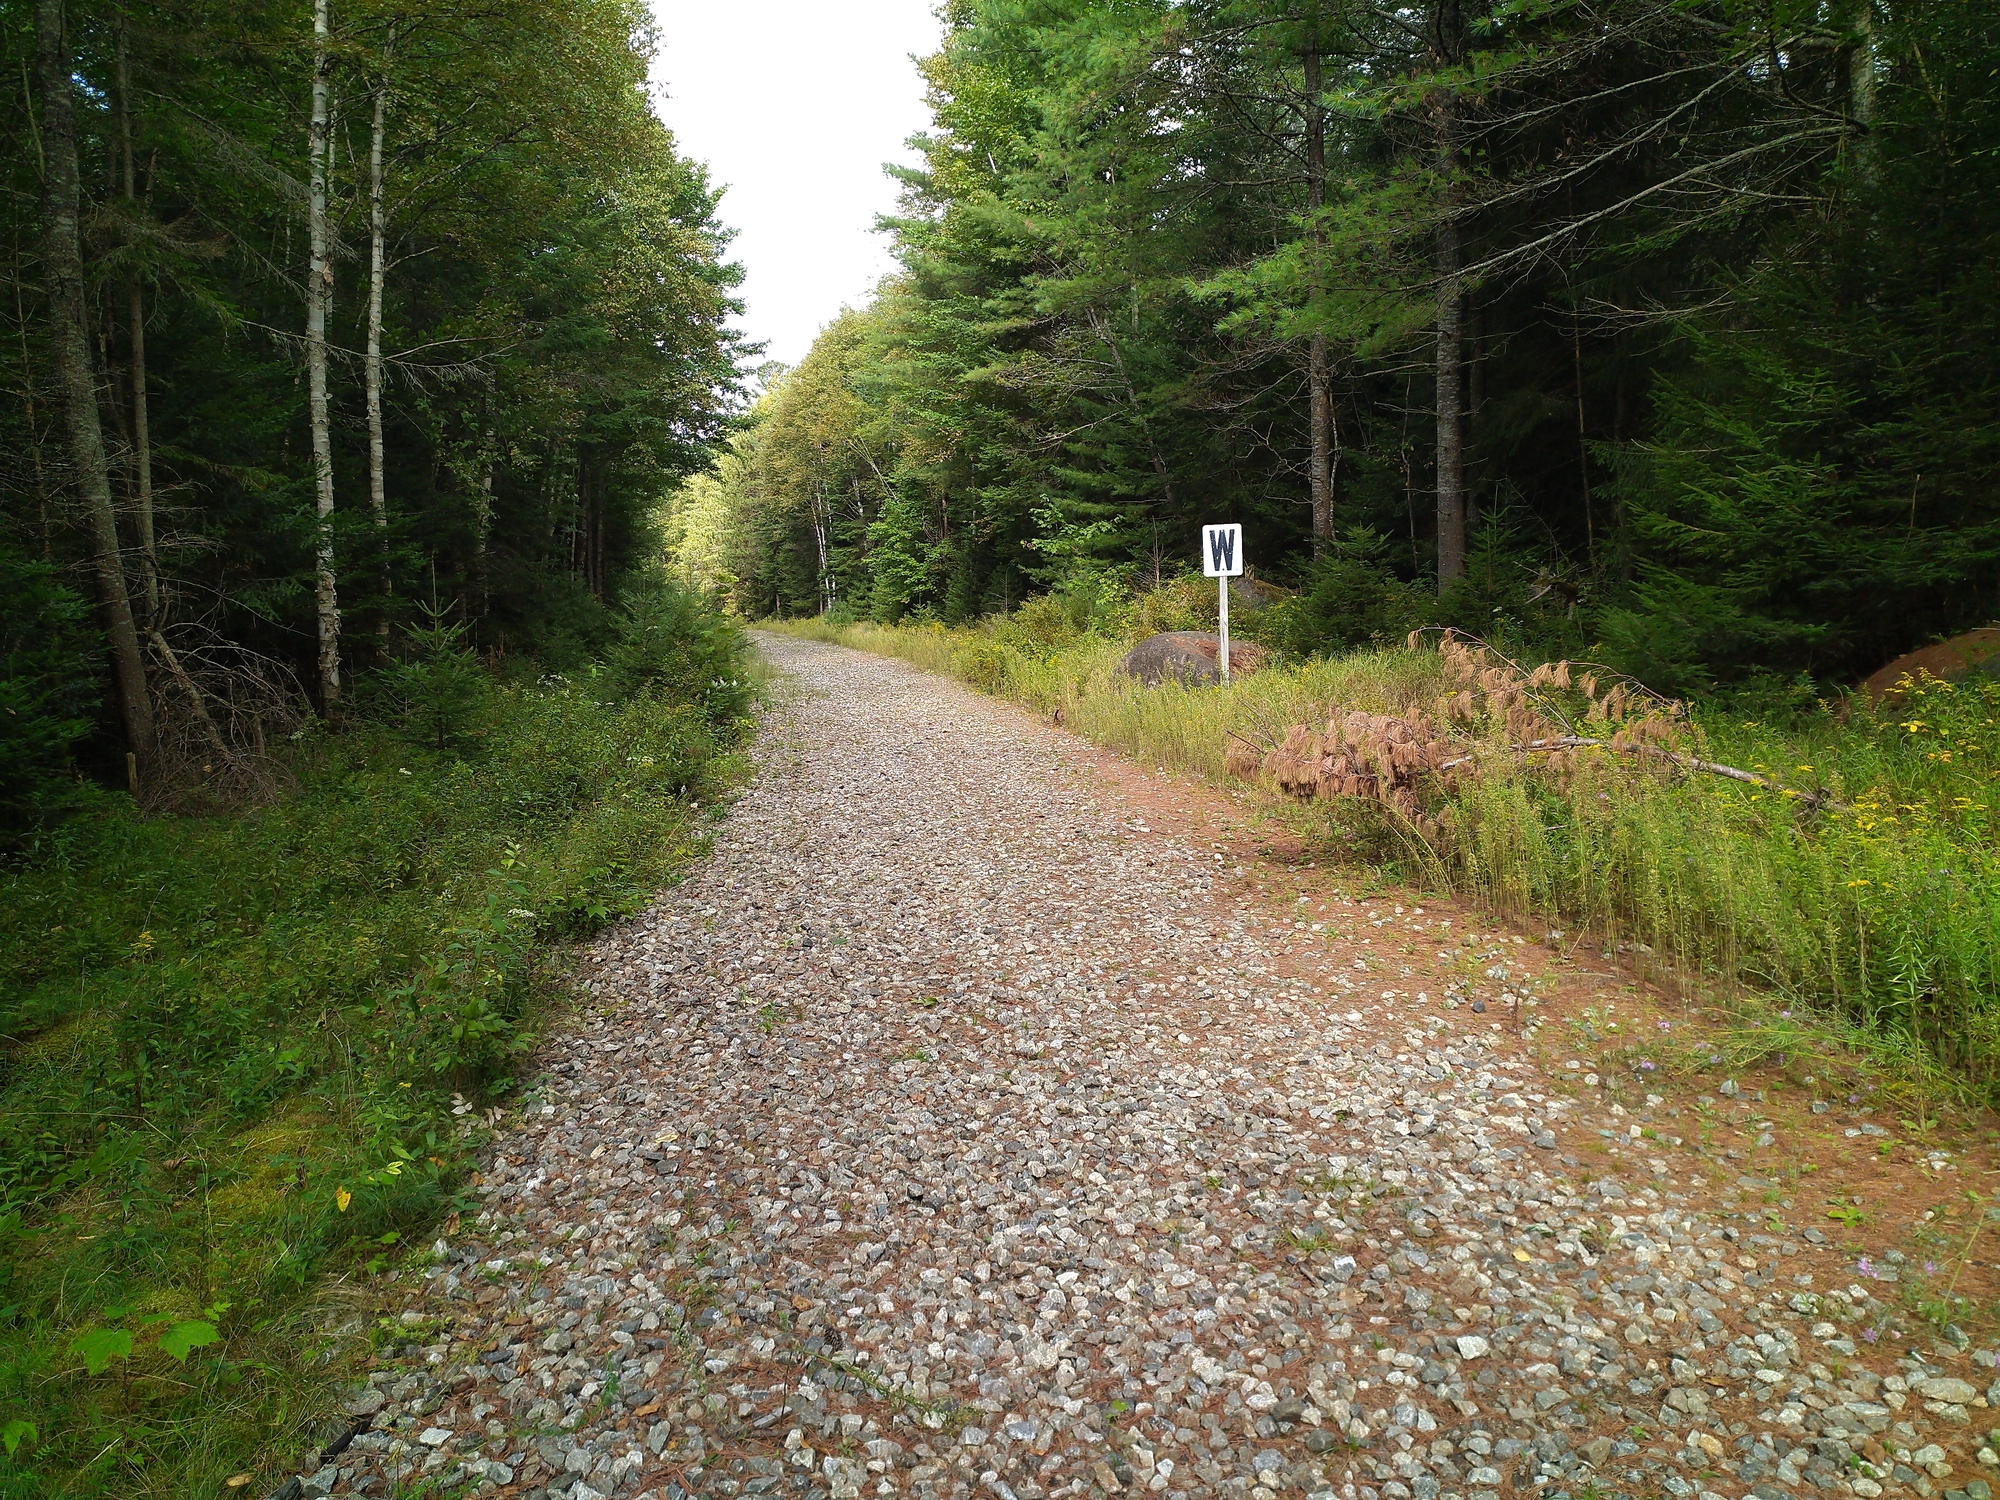 Saranac Lake-Lake Placid railway right-of-way, stripped of rails,on its way to becoming a multi-use trail.